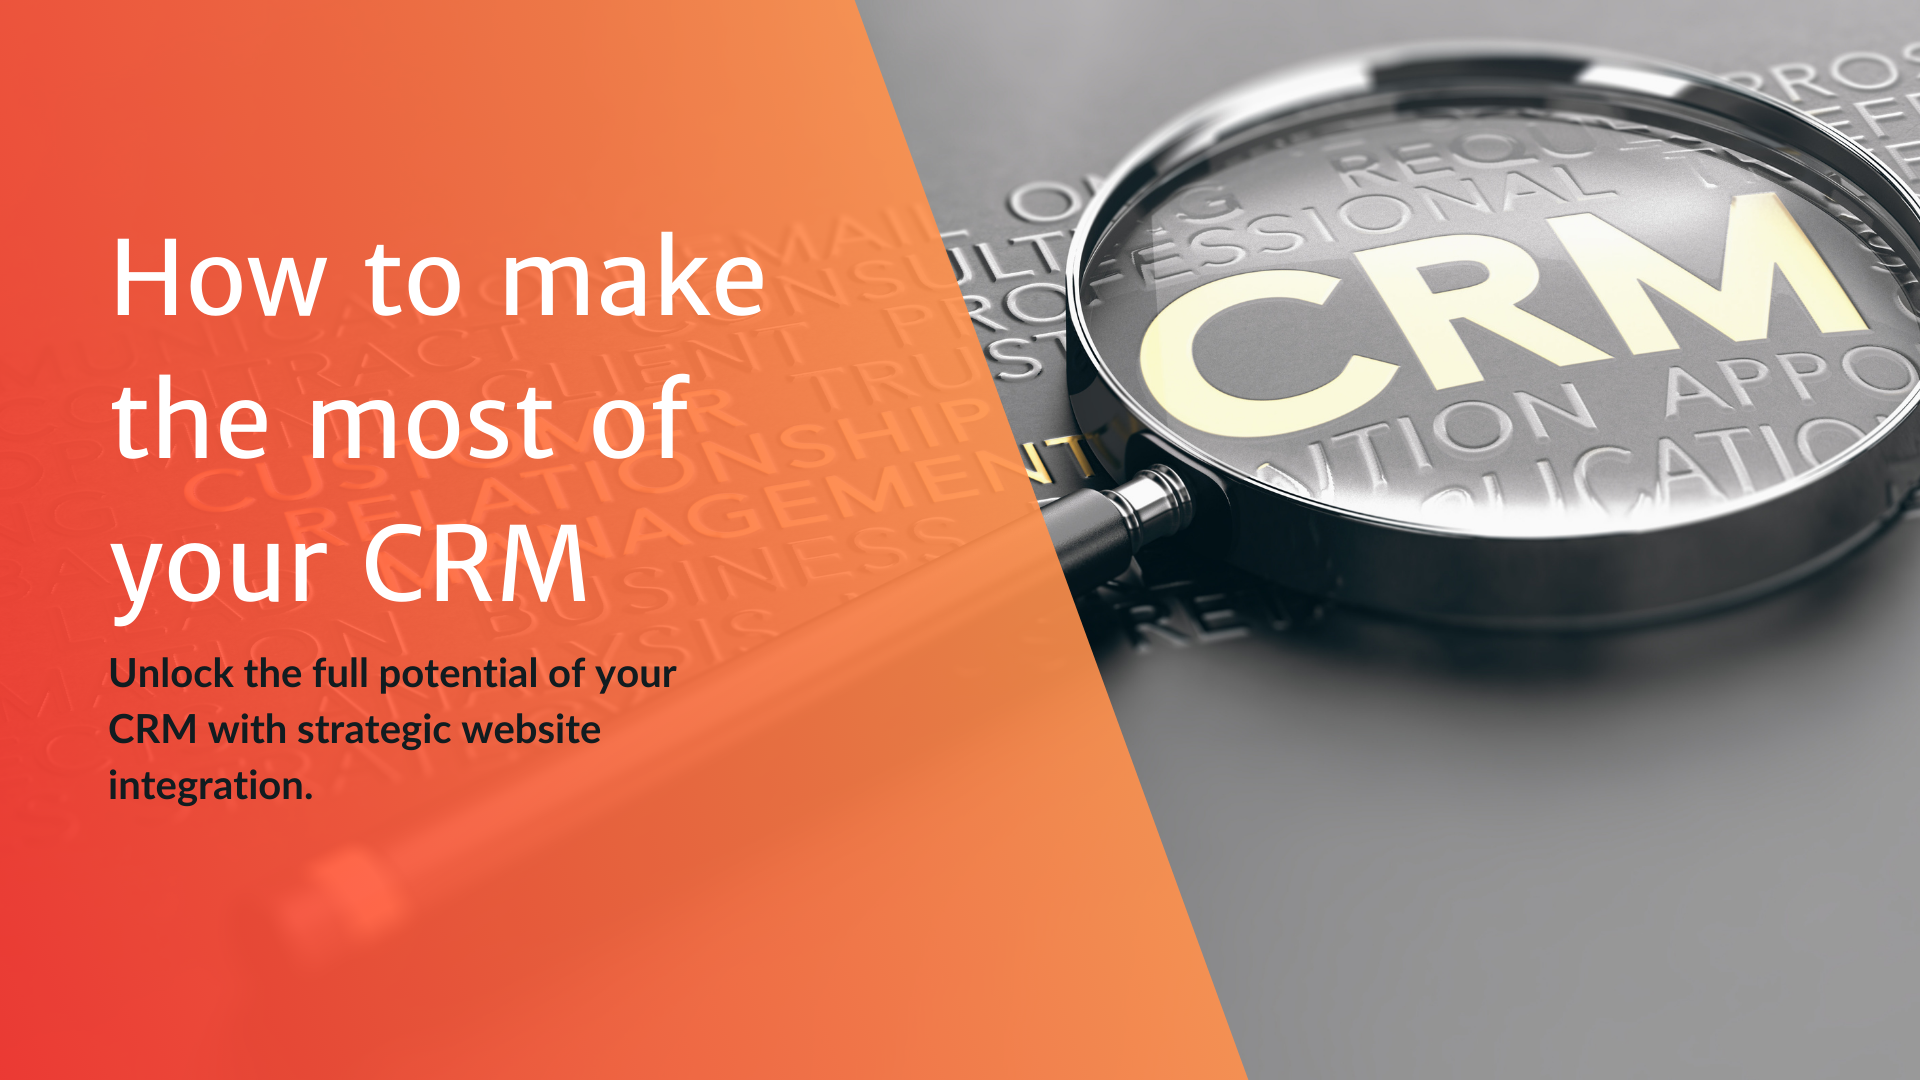 How to make the most of your CRM